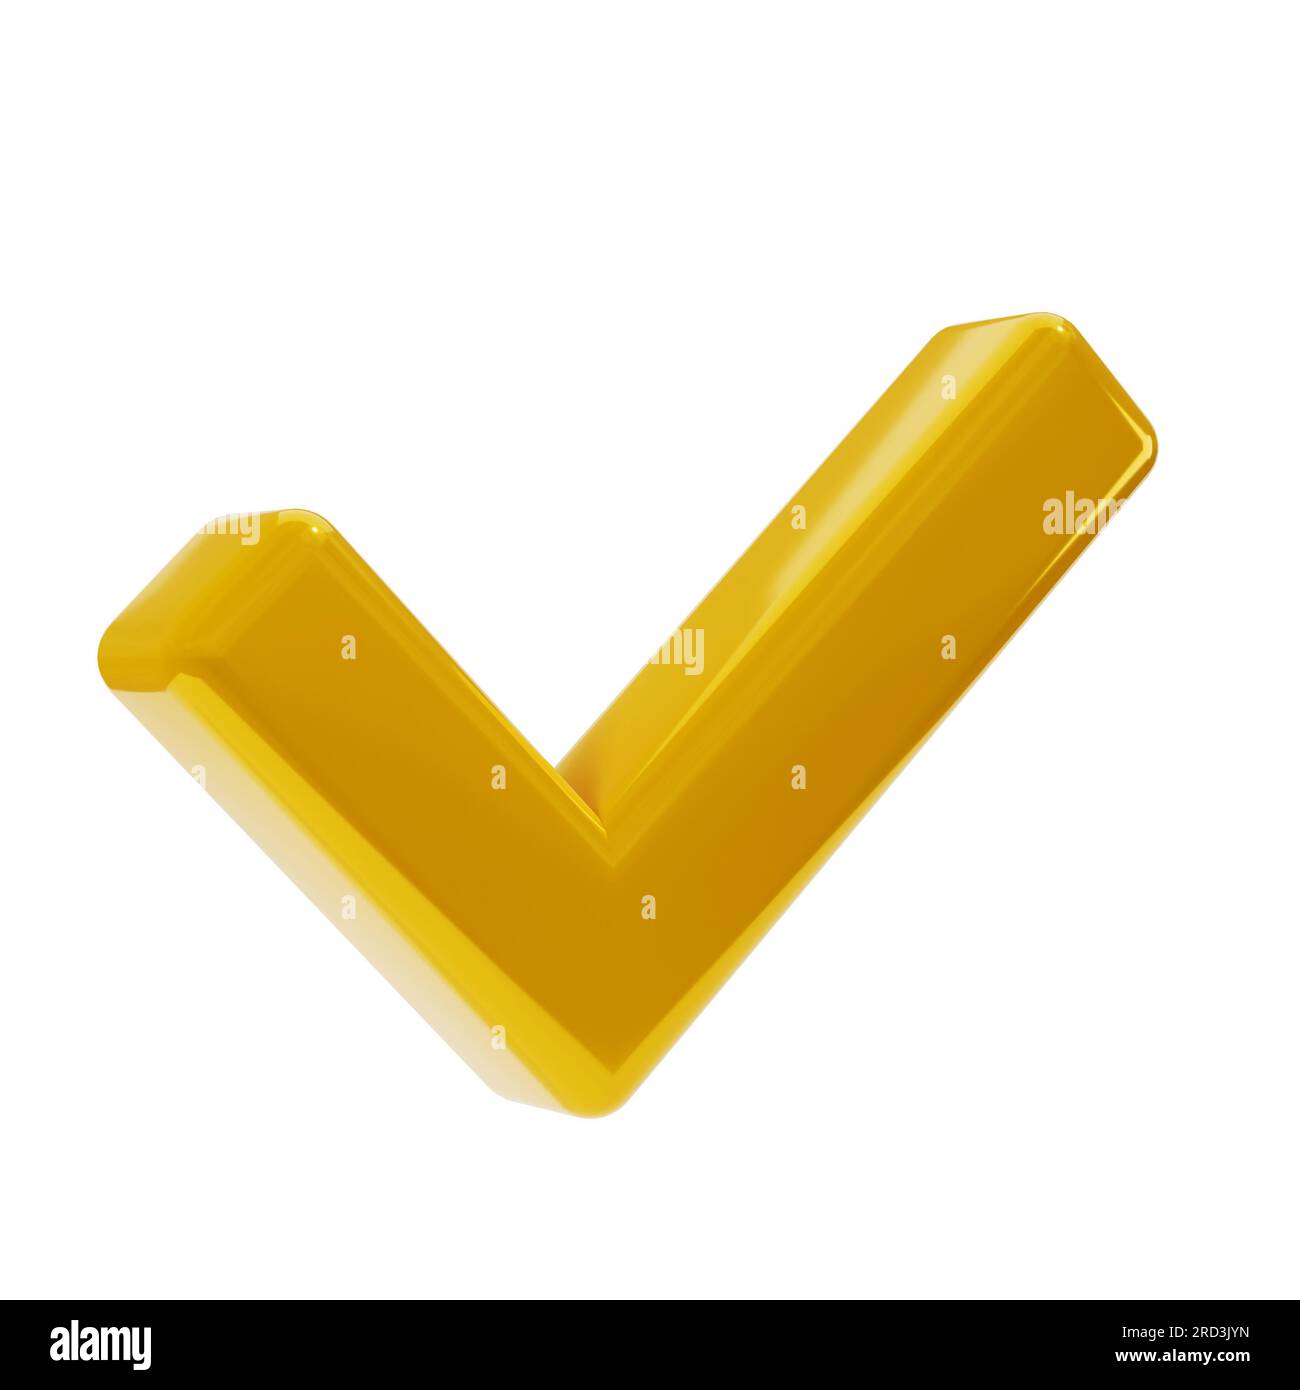 3d golden icon of check mark illustration. gold tick in isometric view. Element with isolated clipping path. Stock Photo